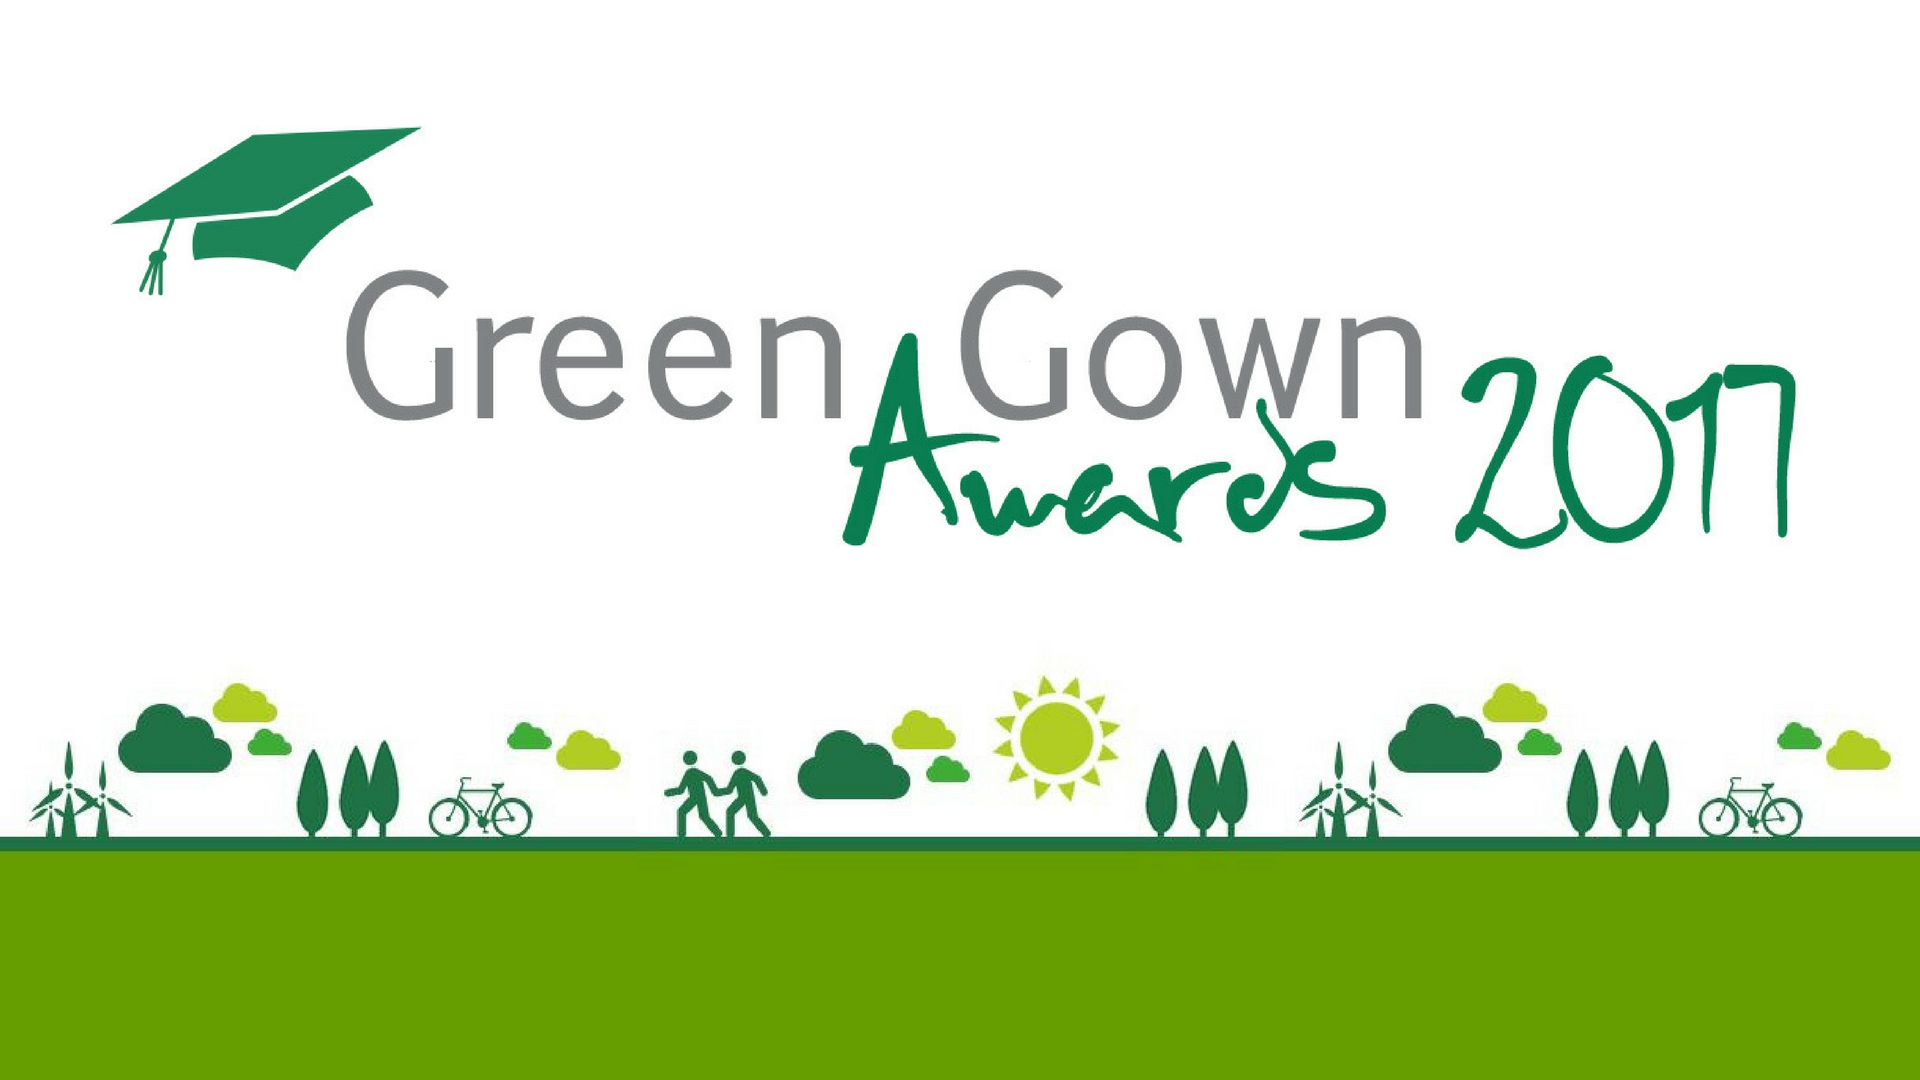 Green Gown Awards News Cardiff University